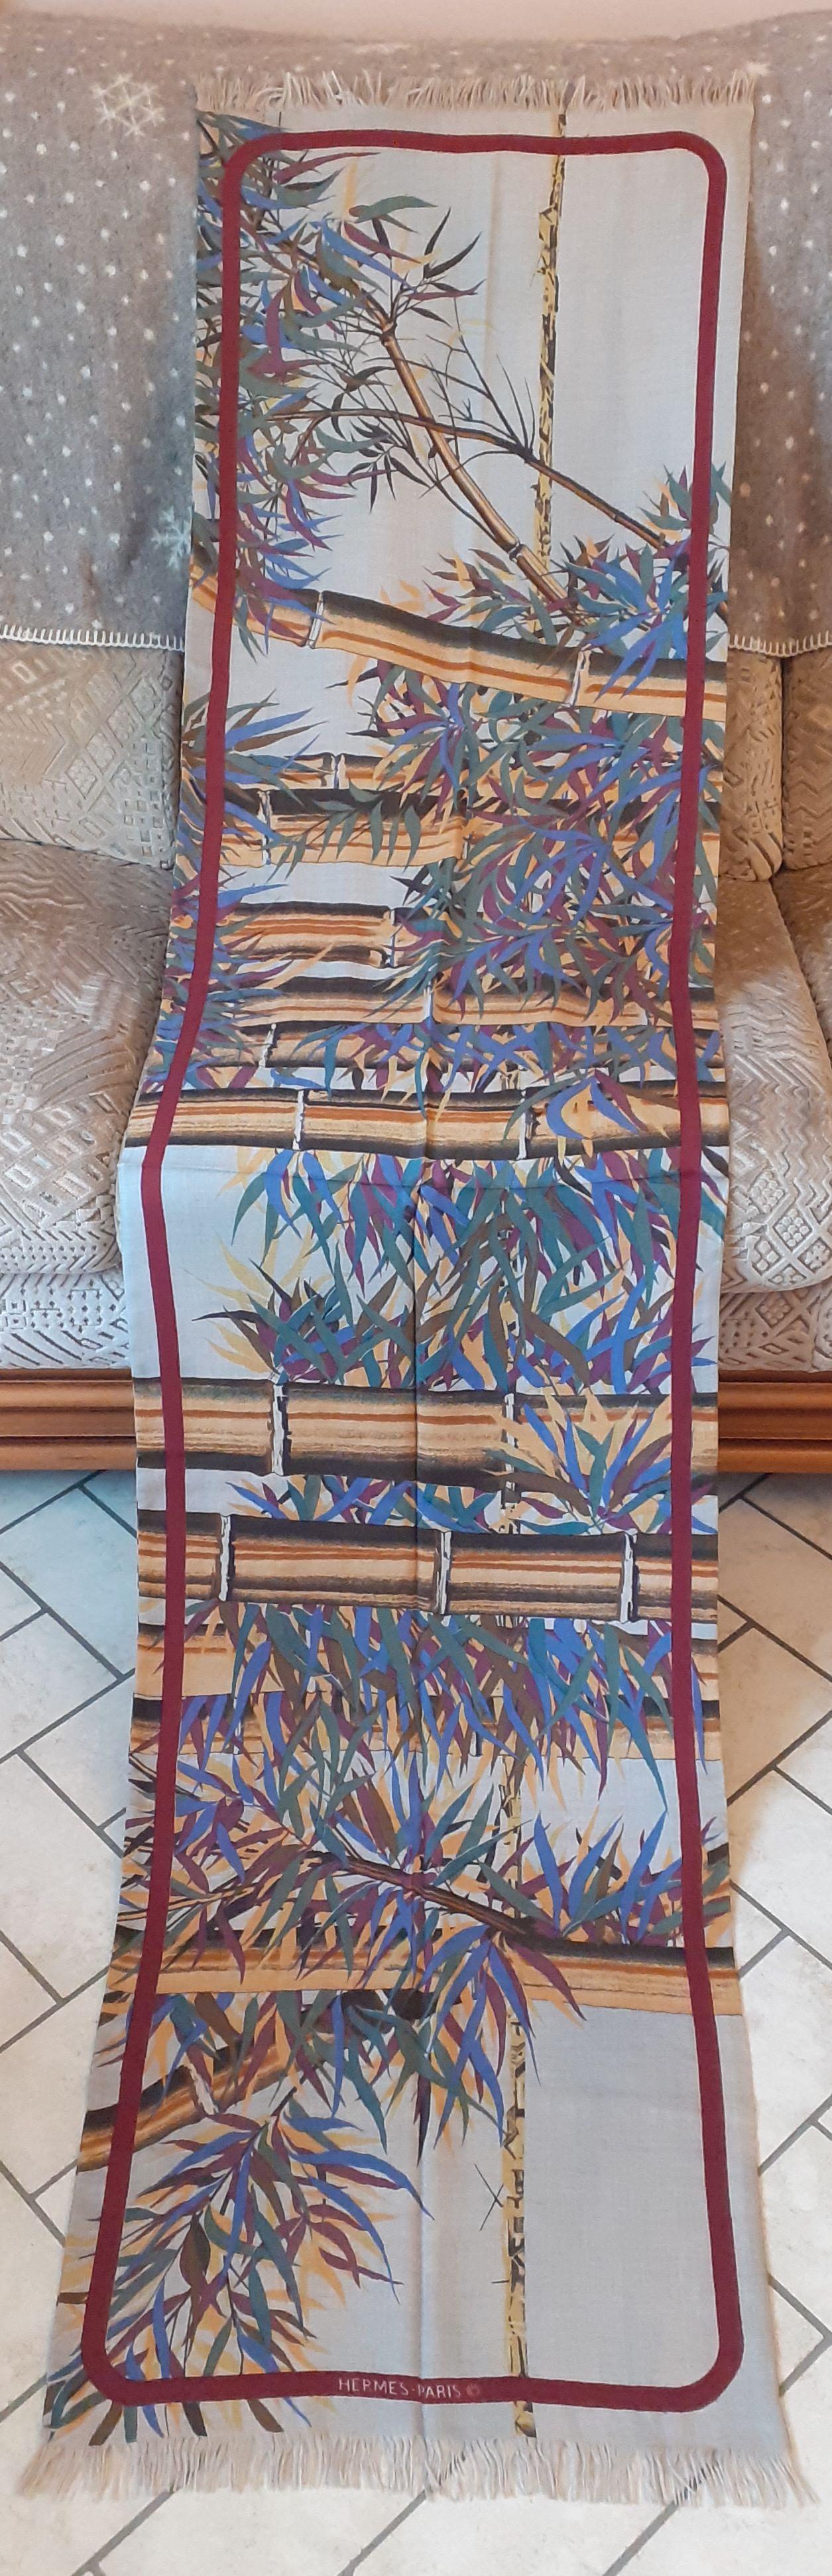 Beautiful and Rare Authentic Hermès Scarf

Print: Bamboo

Vintage Item

Made of 65% Cashmere and 35% Silk

Fully lined

Fringed at each end

Colorways: Heather Gray Background, Yellow Burgundy Green Blue Brown Orange Bamboo

